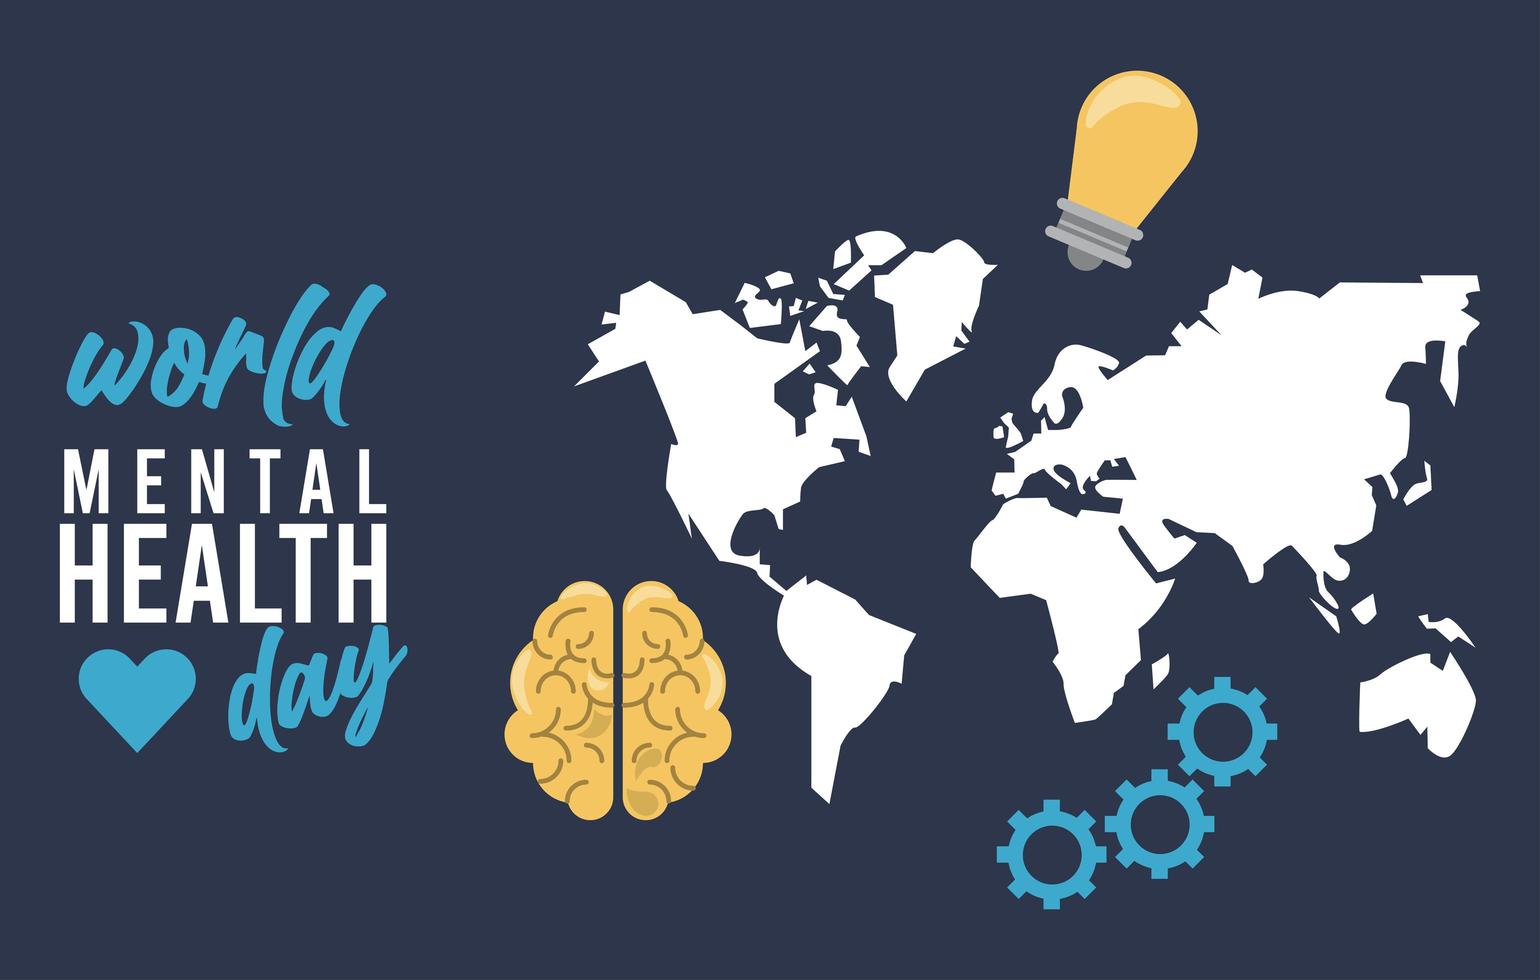 world mental health day campaign with earth maps and bulb vector